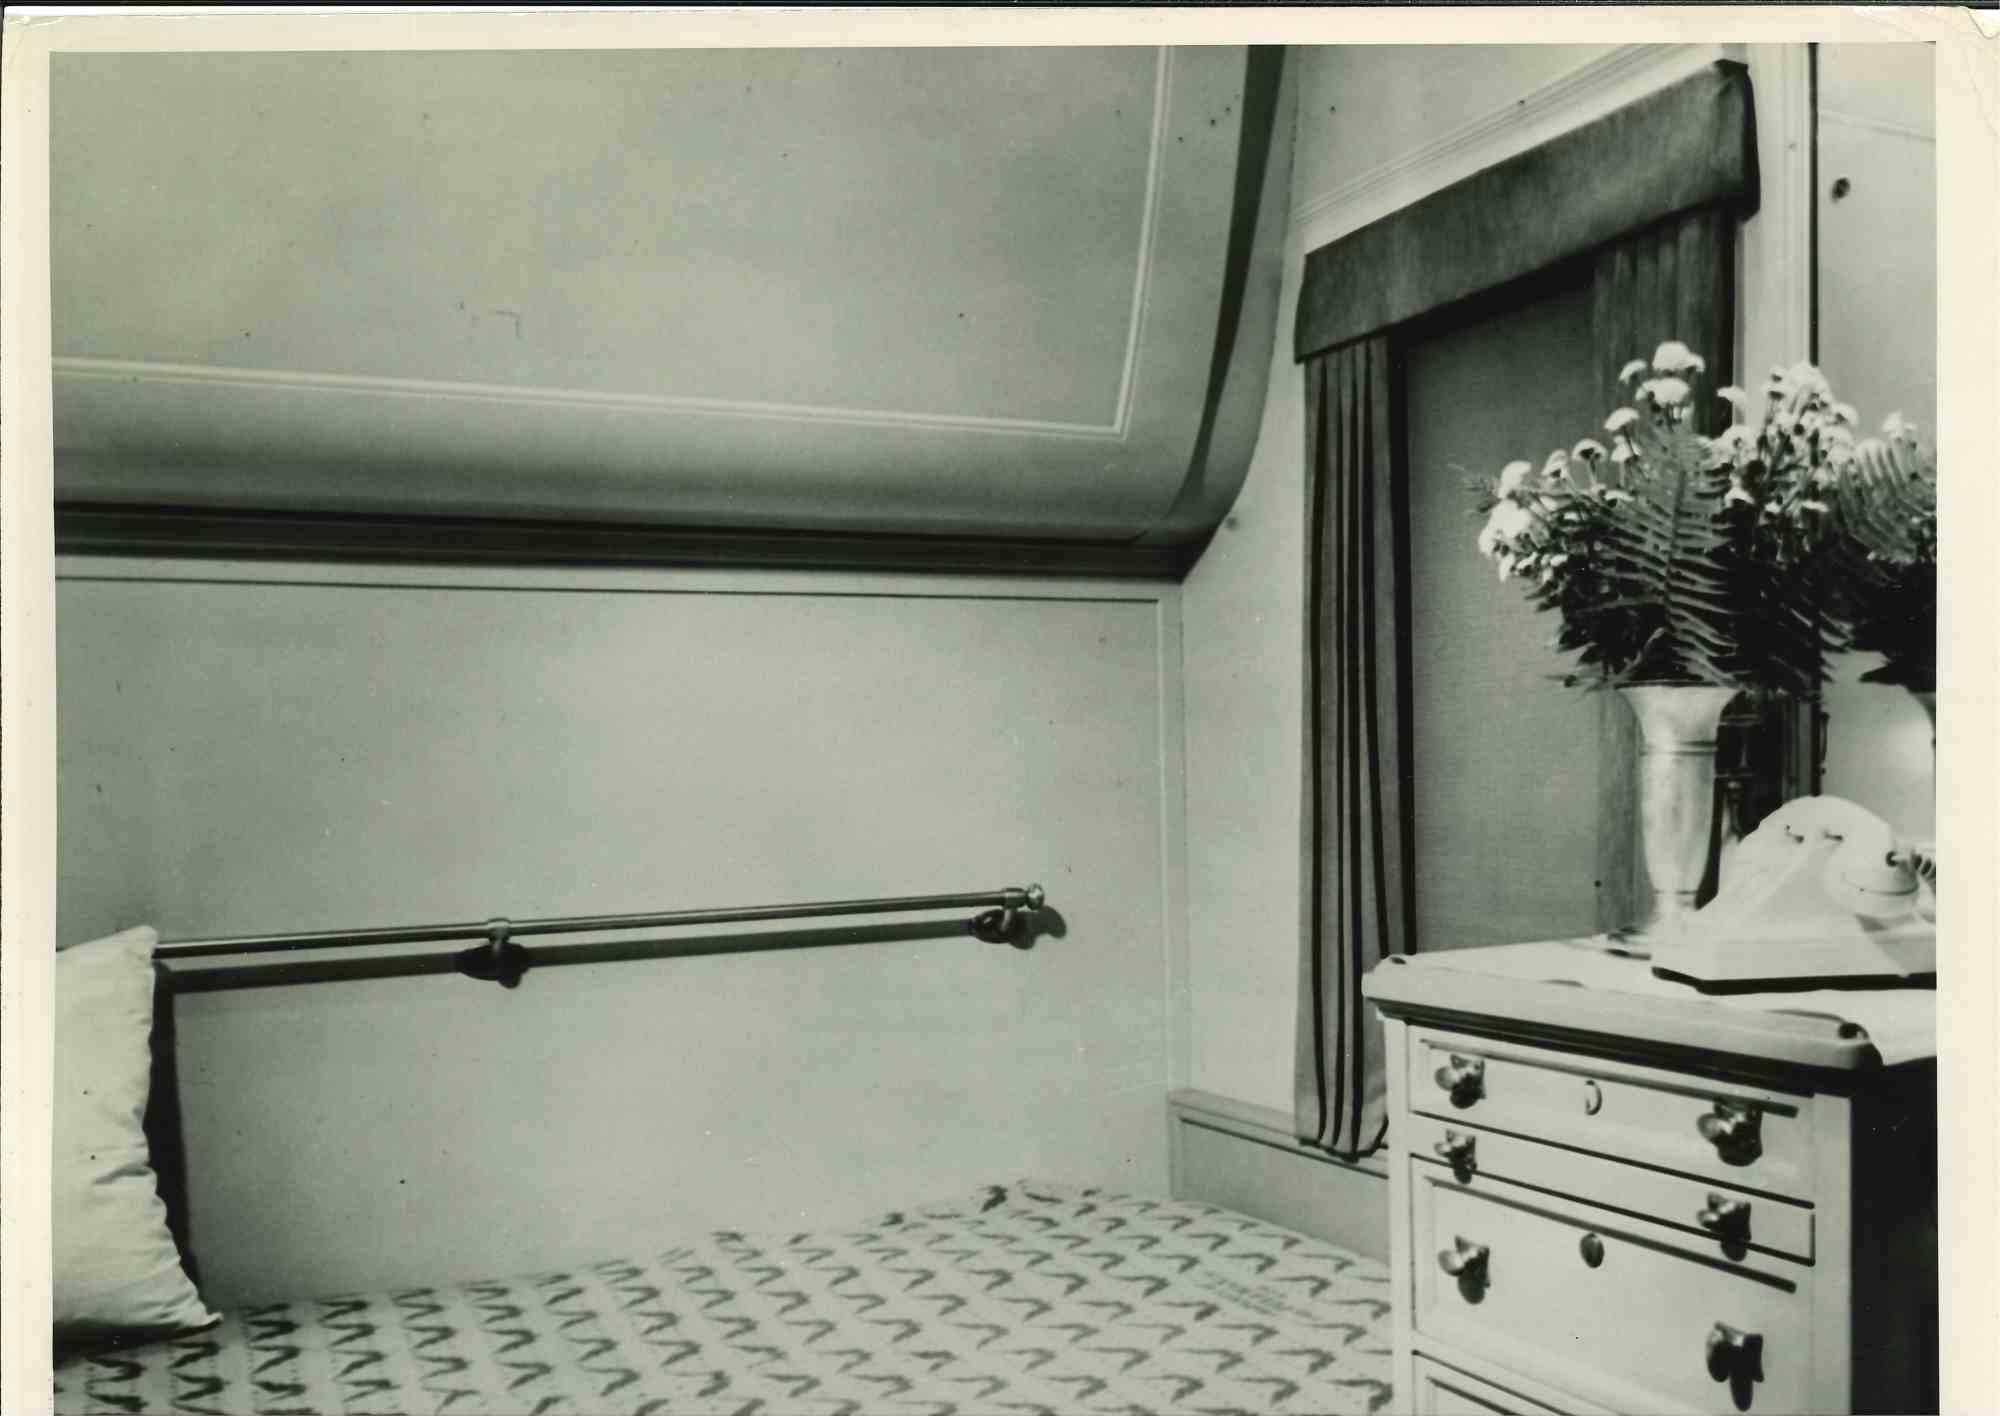 Unknown Figurative Photograph - White House on wheels  - Vintage Photograph - Mid 20th Century